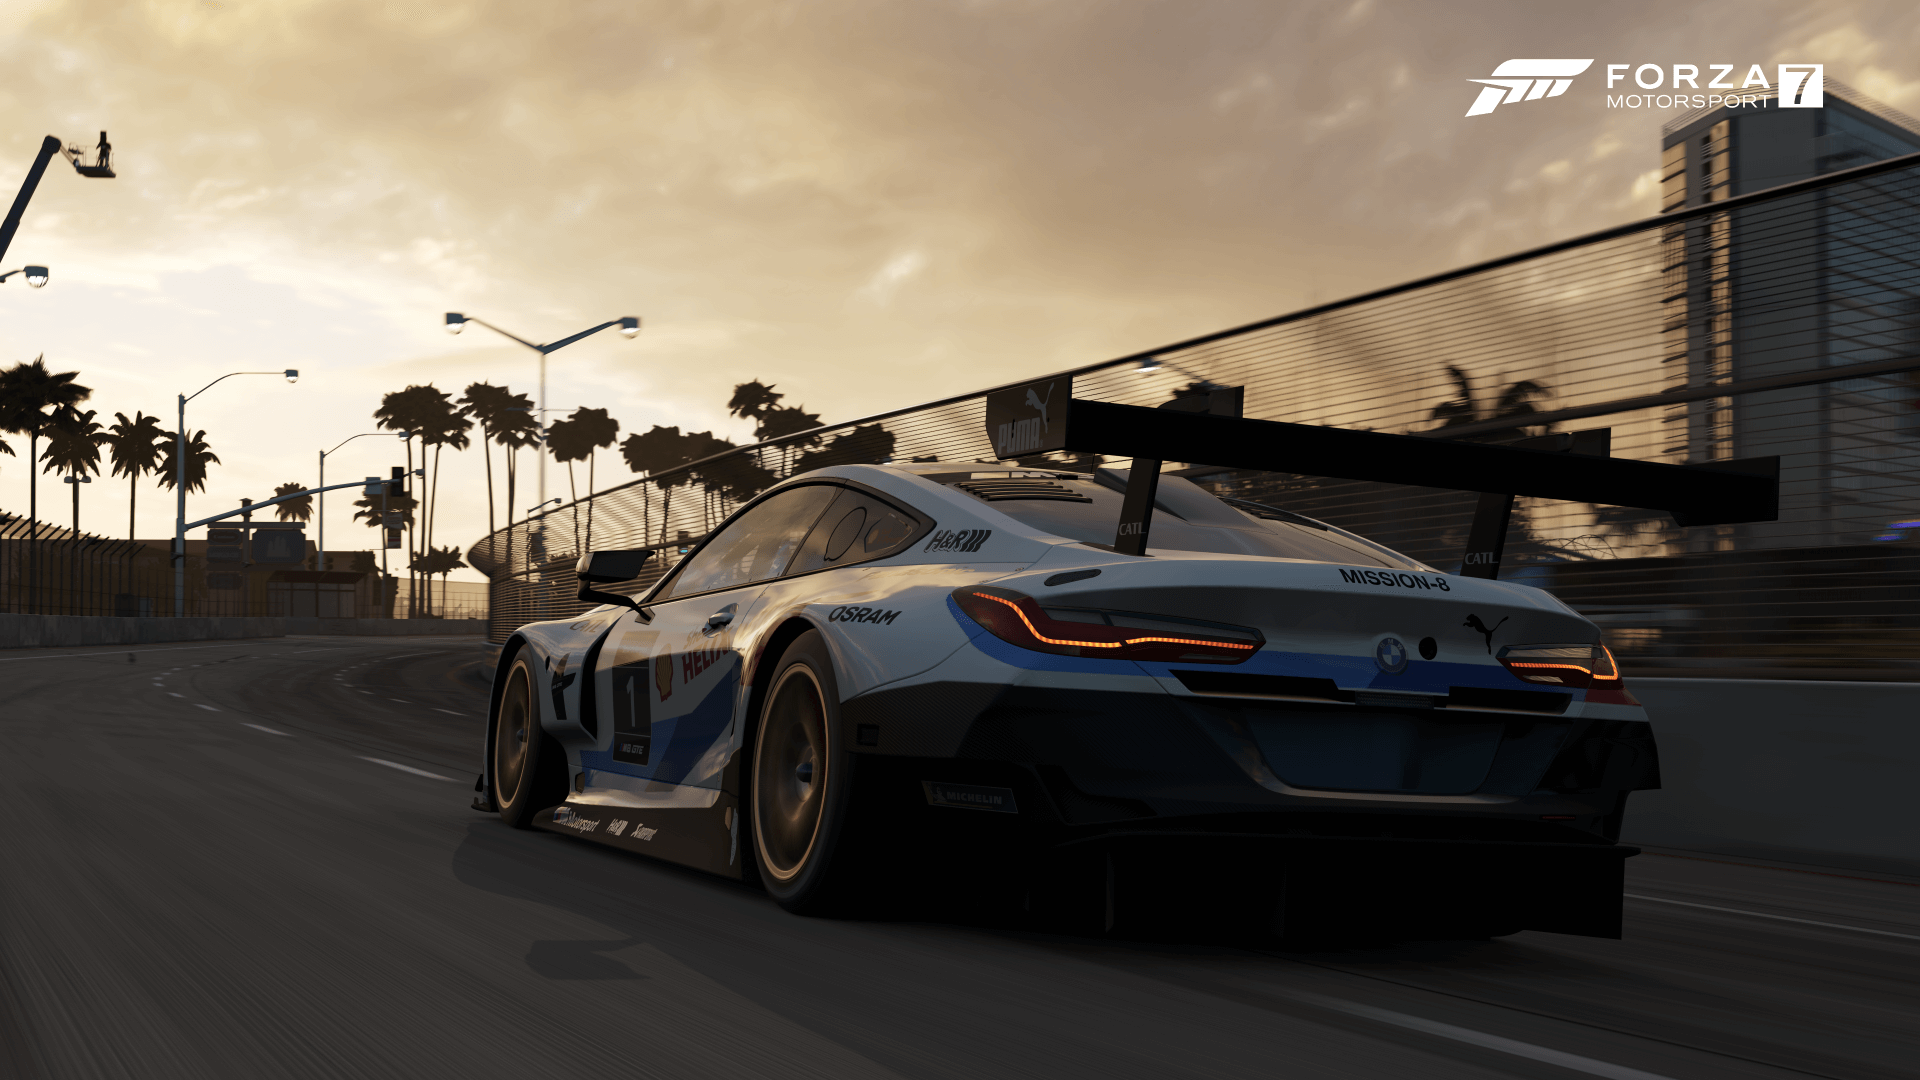 Forza Motorsport 7 July Update Now Available – GTPlanet